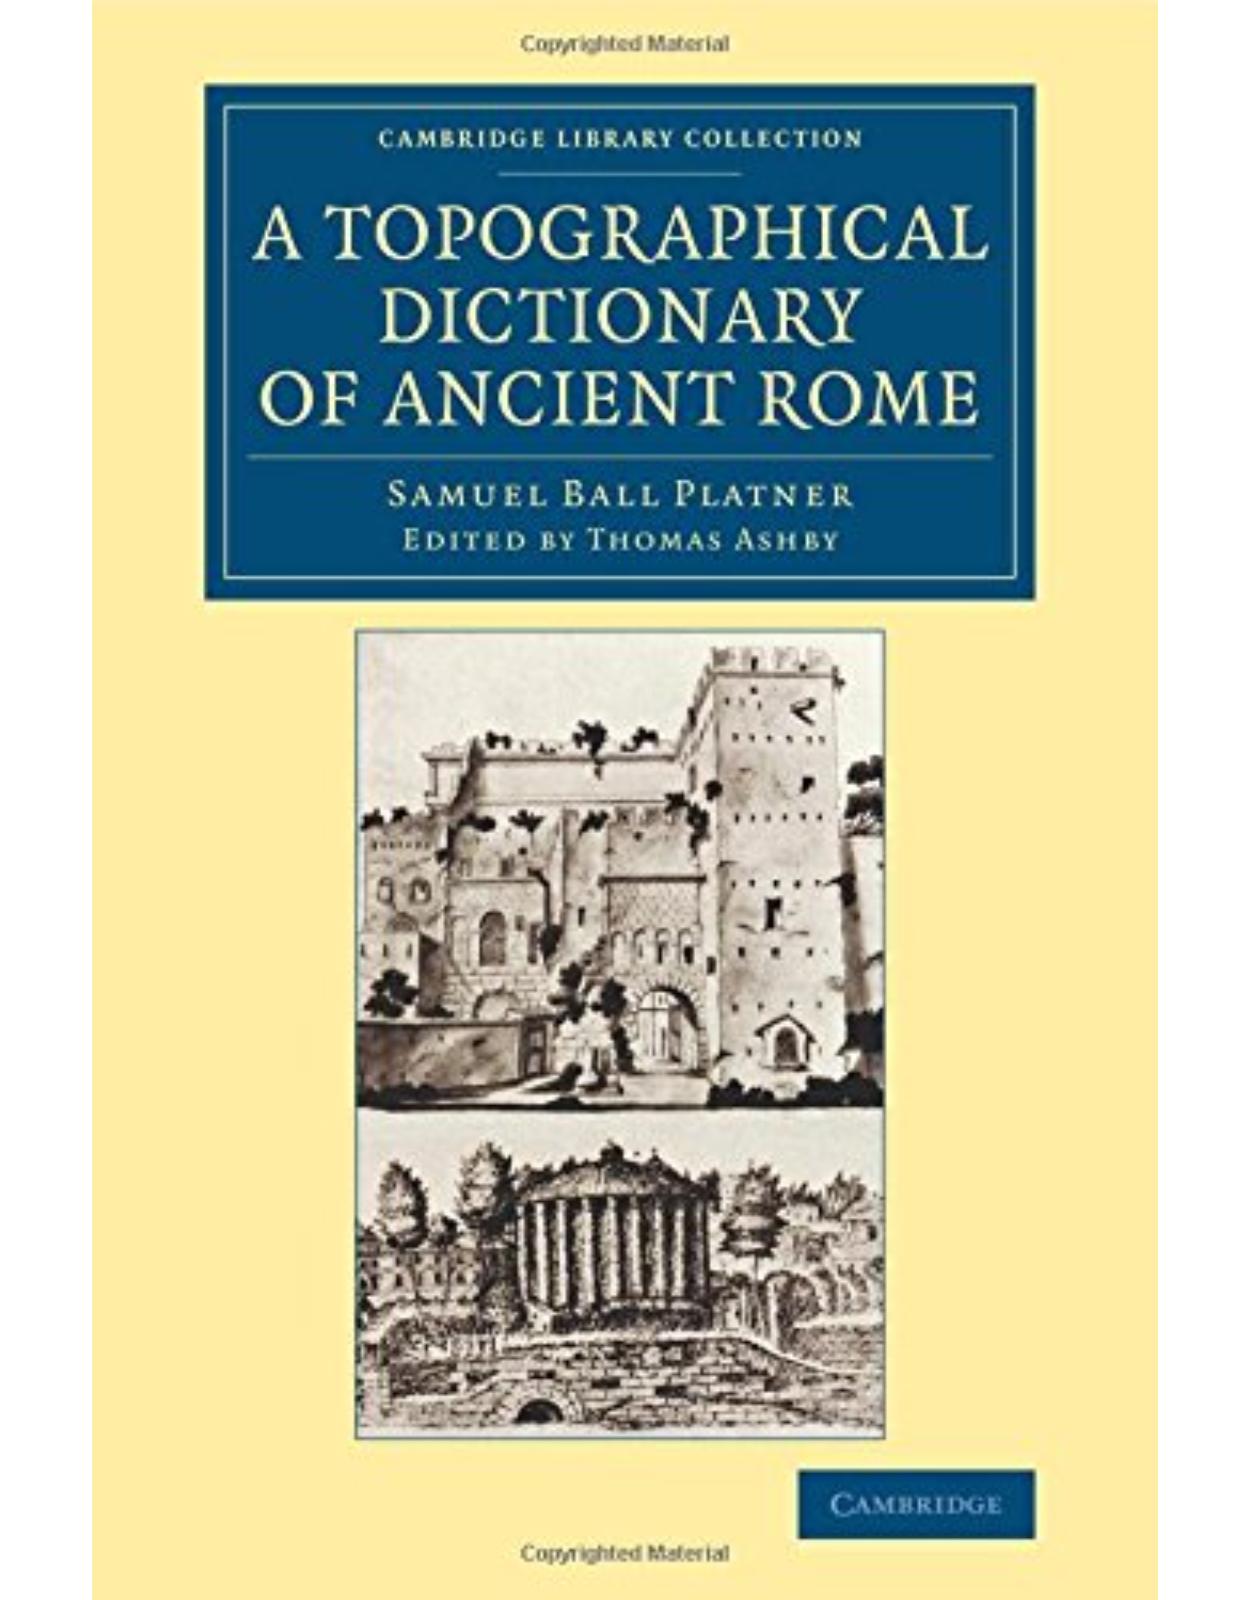 A Topographical Dictionary of Ancient Rome (Cambridge Library Collection - Archaeology)